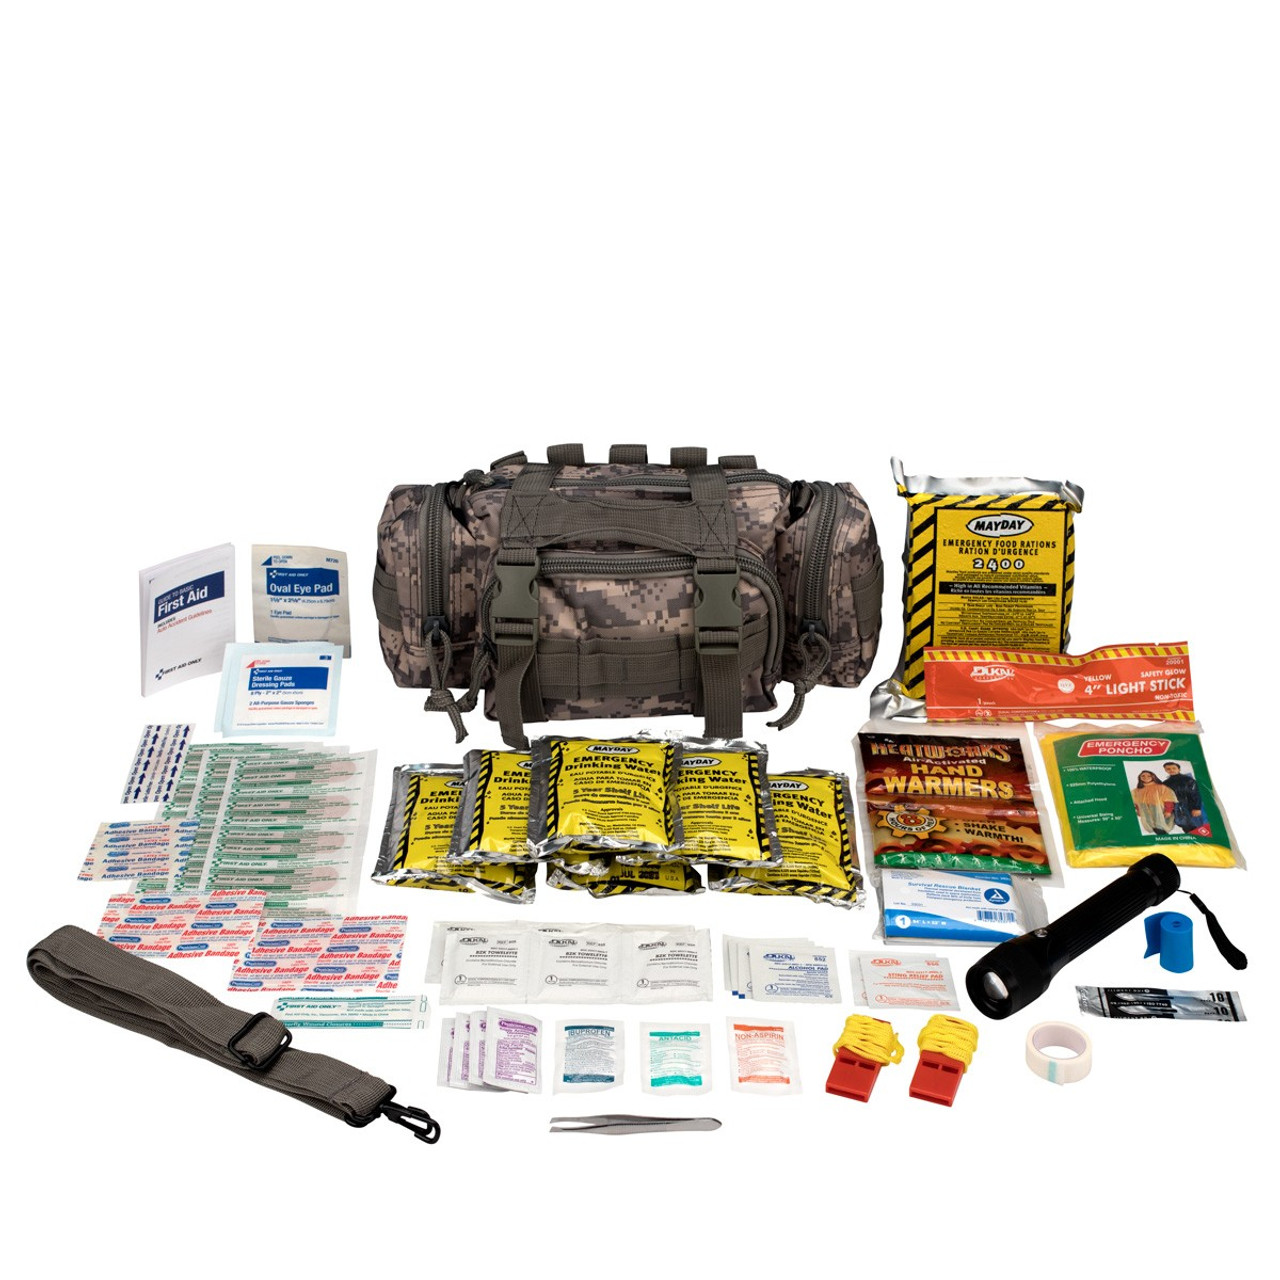 First Aid Only 90453 Camillus First Aid 3 Day Survival Kit With Emergency  Food And Water, Black (73 Piece Kit)